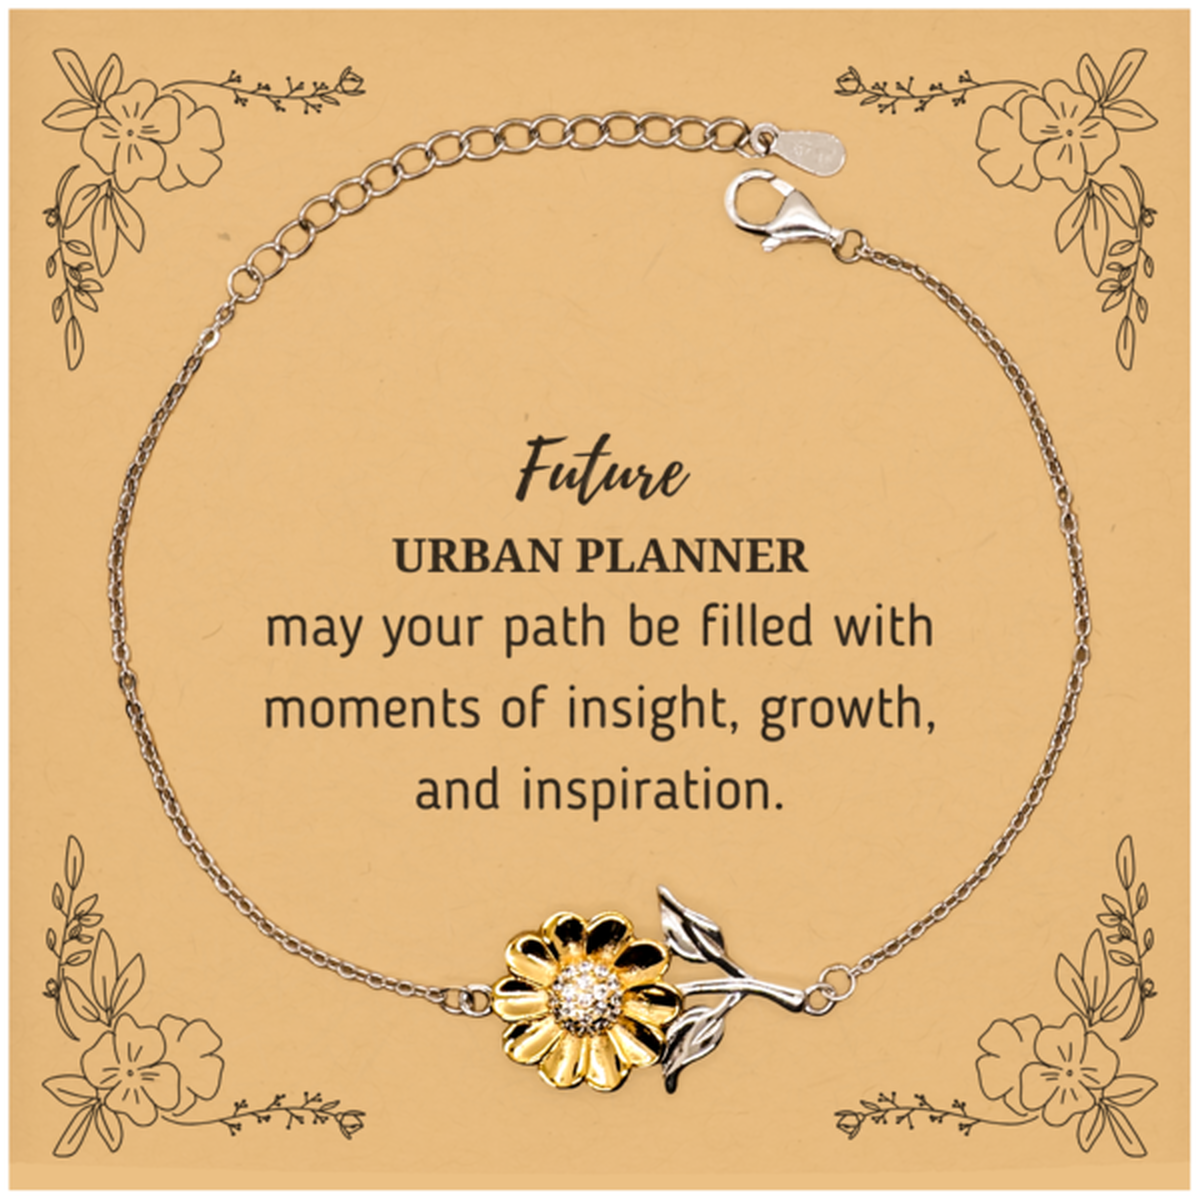 Future Urban Planner Gifts, May your path be filled with moments of insight, Graduation Gifts for New Urban Planner, Christmas Unique Sunflower Bracelet For Men, Women, Friends